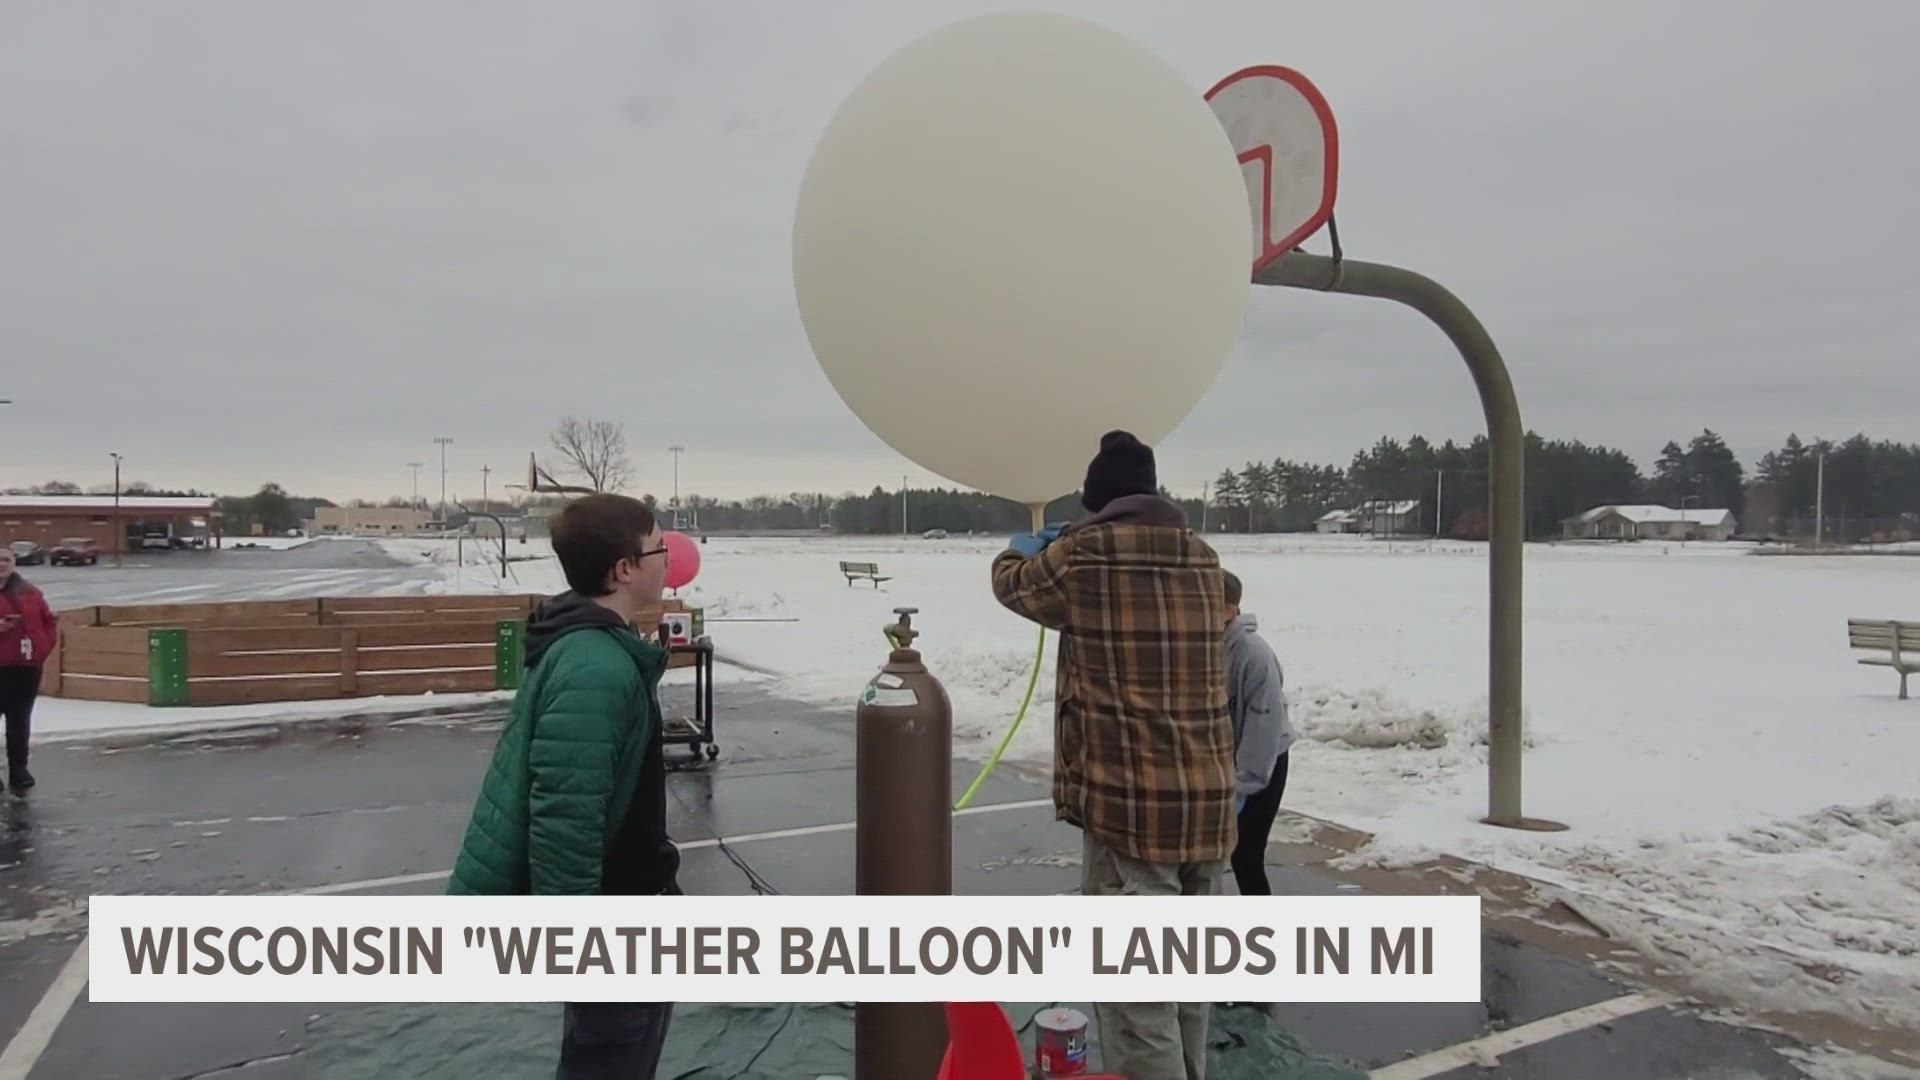 Meteorologist Michael Behrens explains what weather balloons are and why we use them.